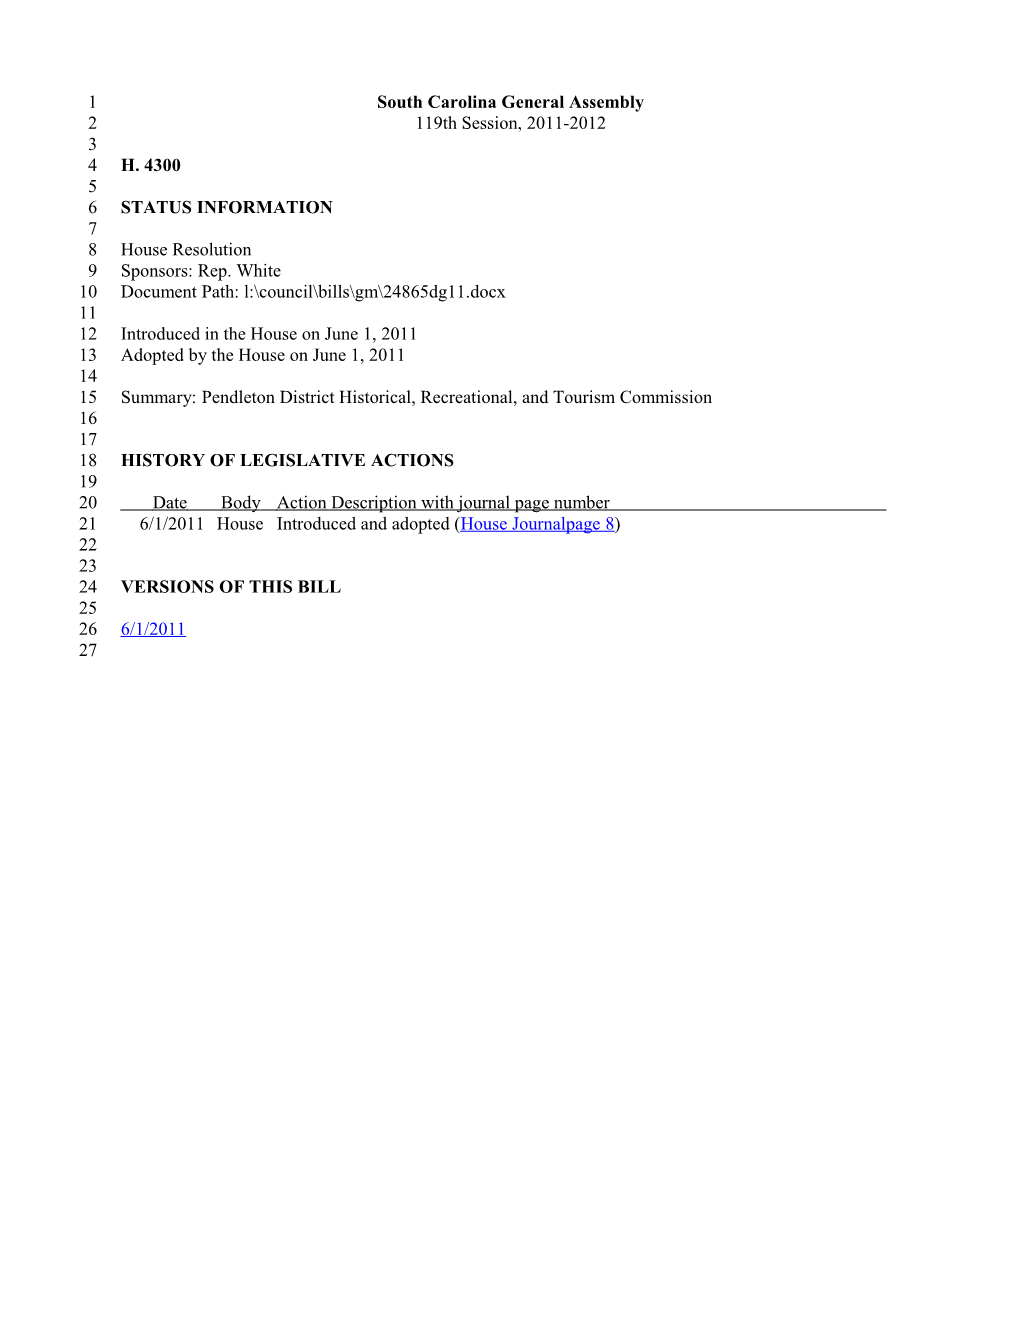 2011-2012 Bill 4300: Pendleton District Historical, Recreational, and Tourism Commission